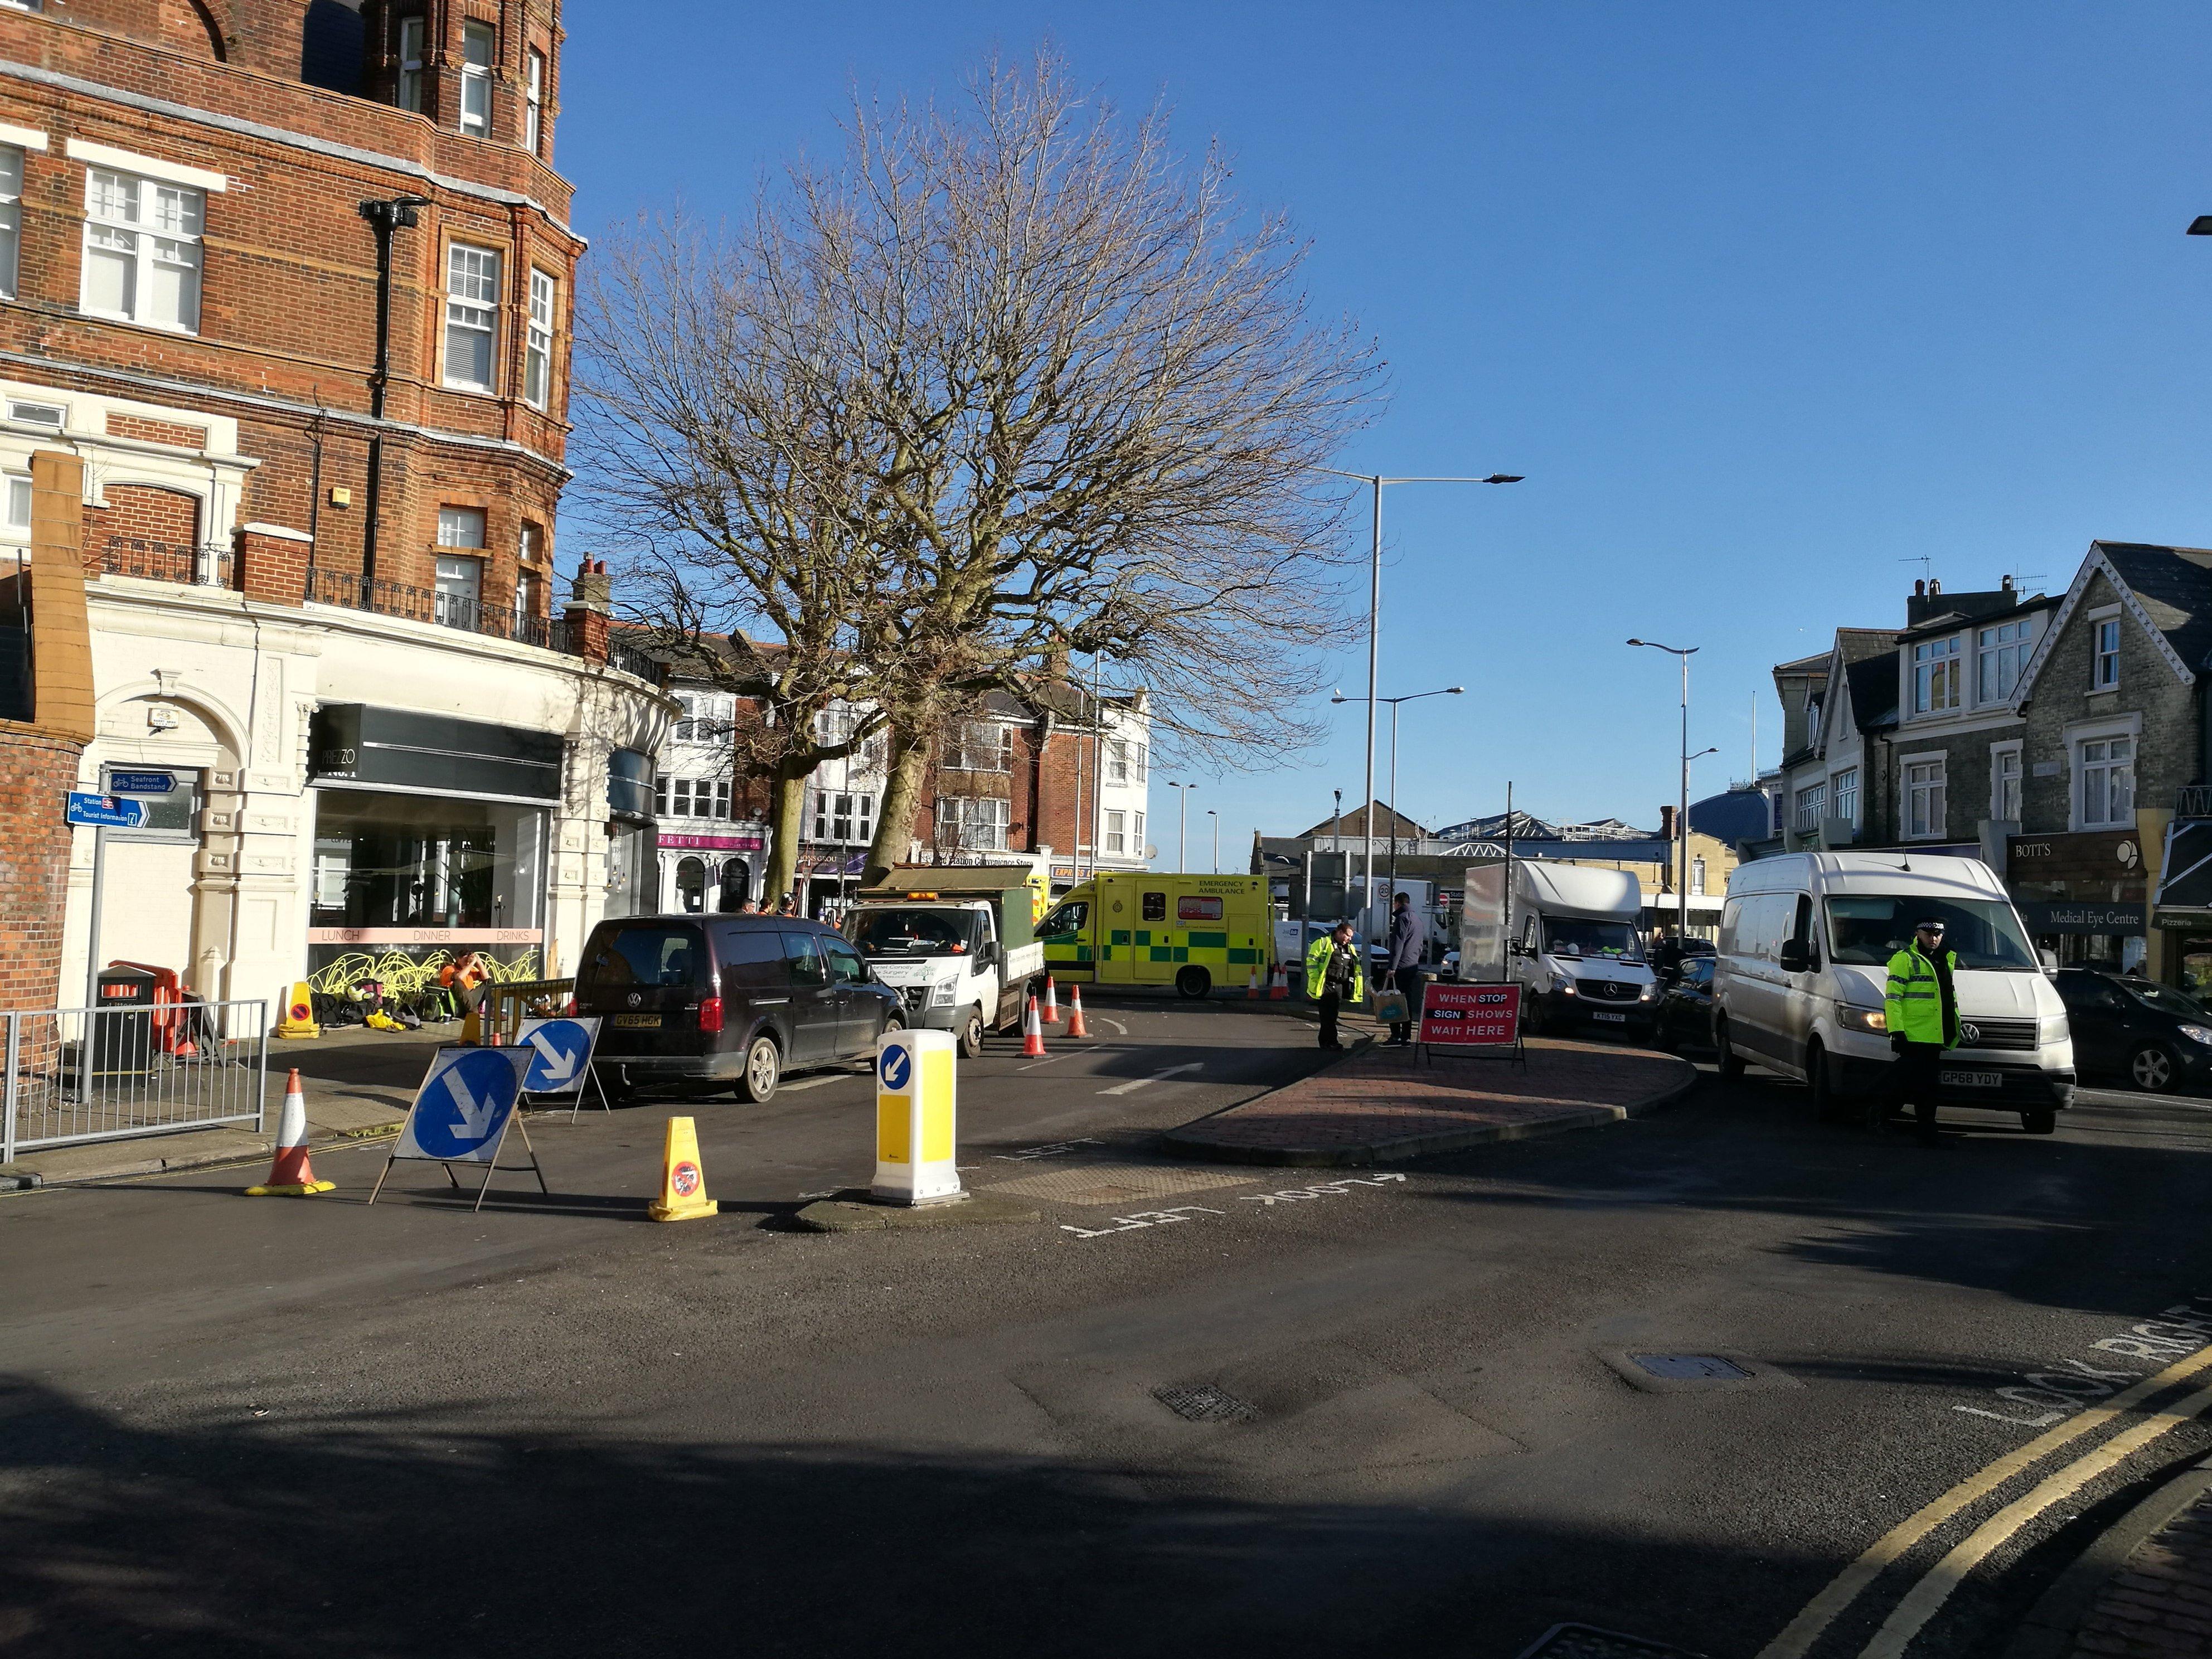 The scene of the accident where the man fell and has "potentially serious" head injuries and was taken to Royal Sussex County Hospital in Brighton